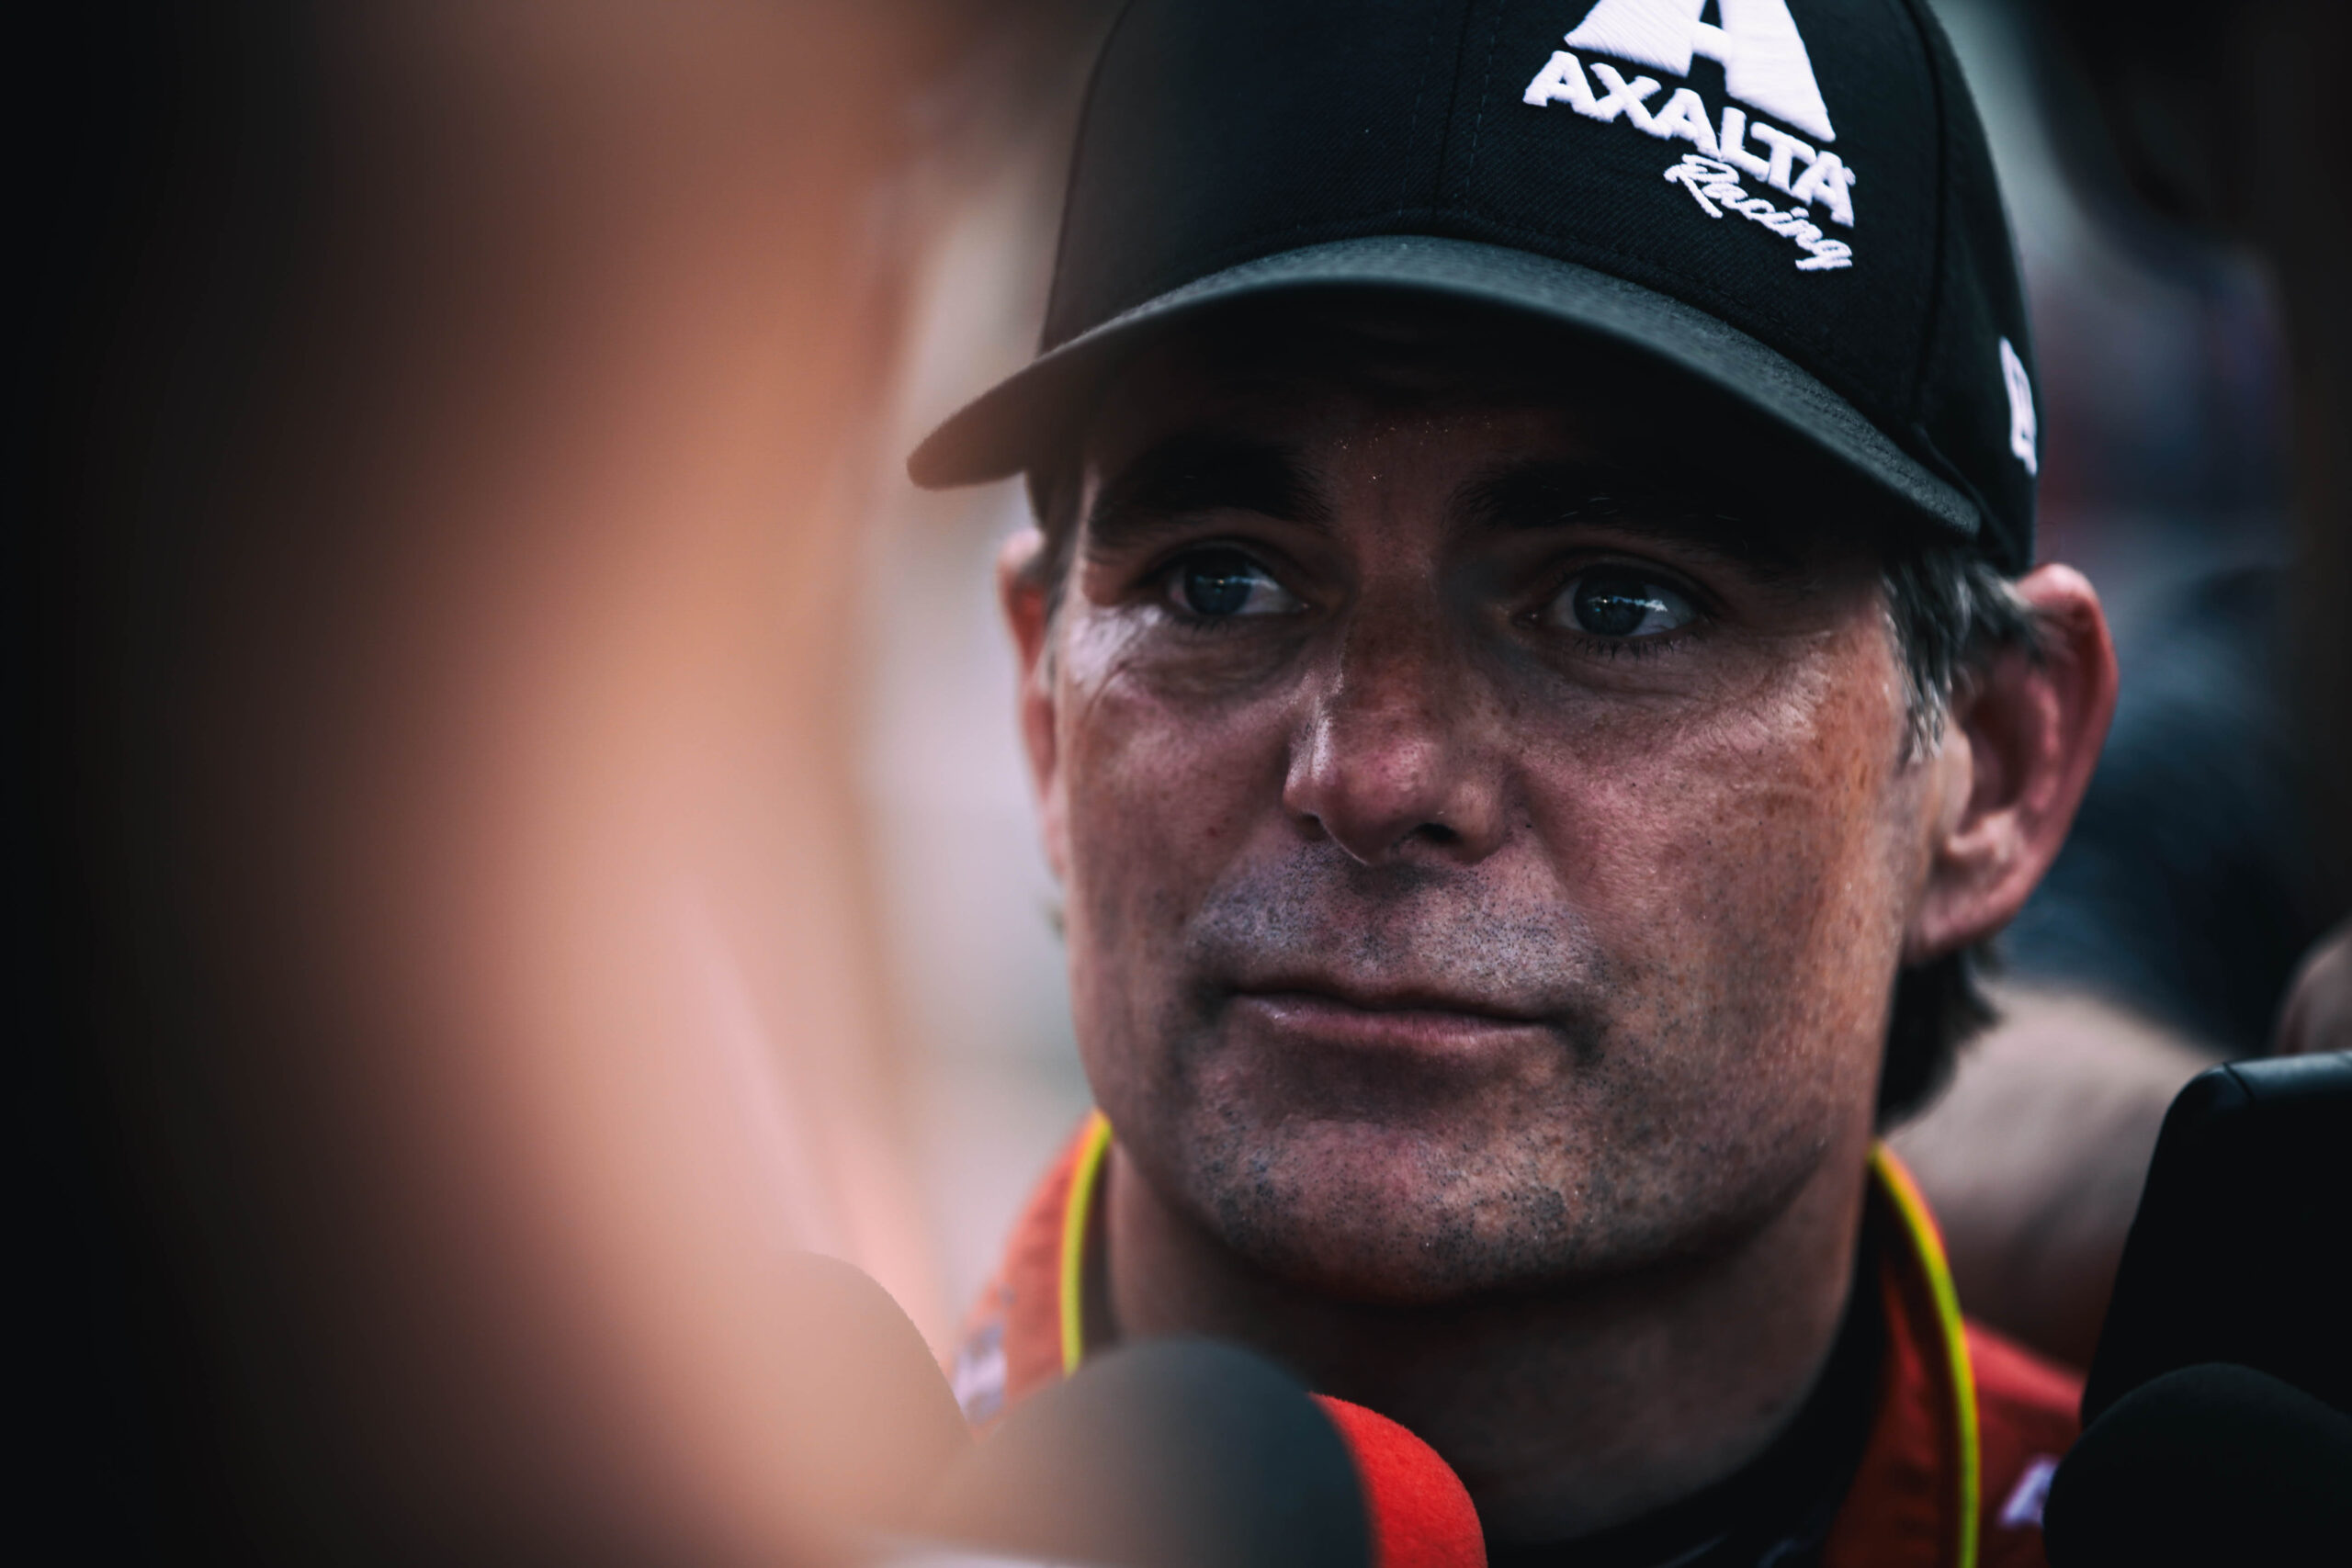 Ultimately, Jeff Gordon greatly considered competing in SRX. (Photo: Shawn Gritzmacher)